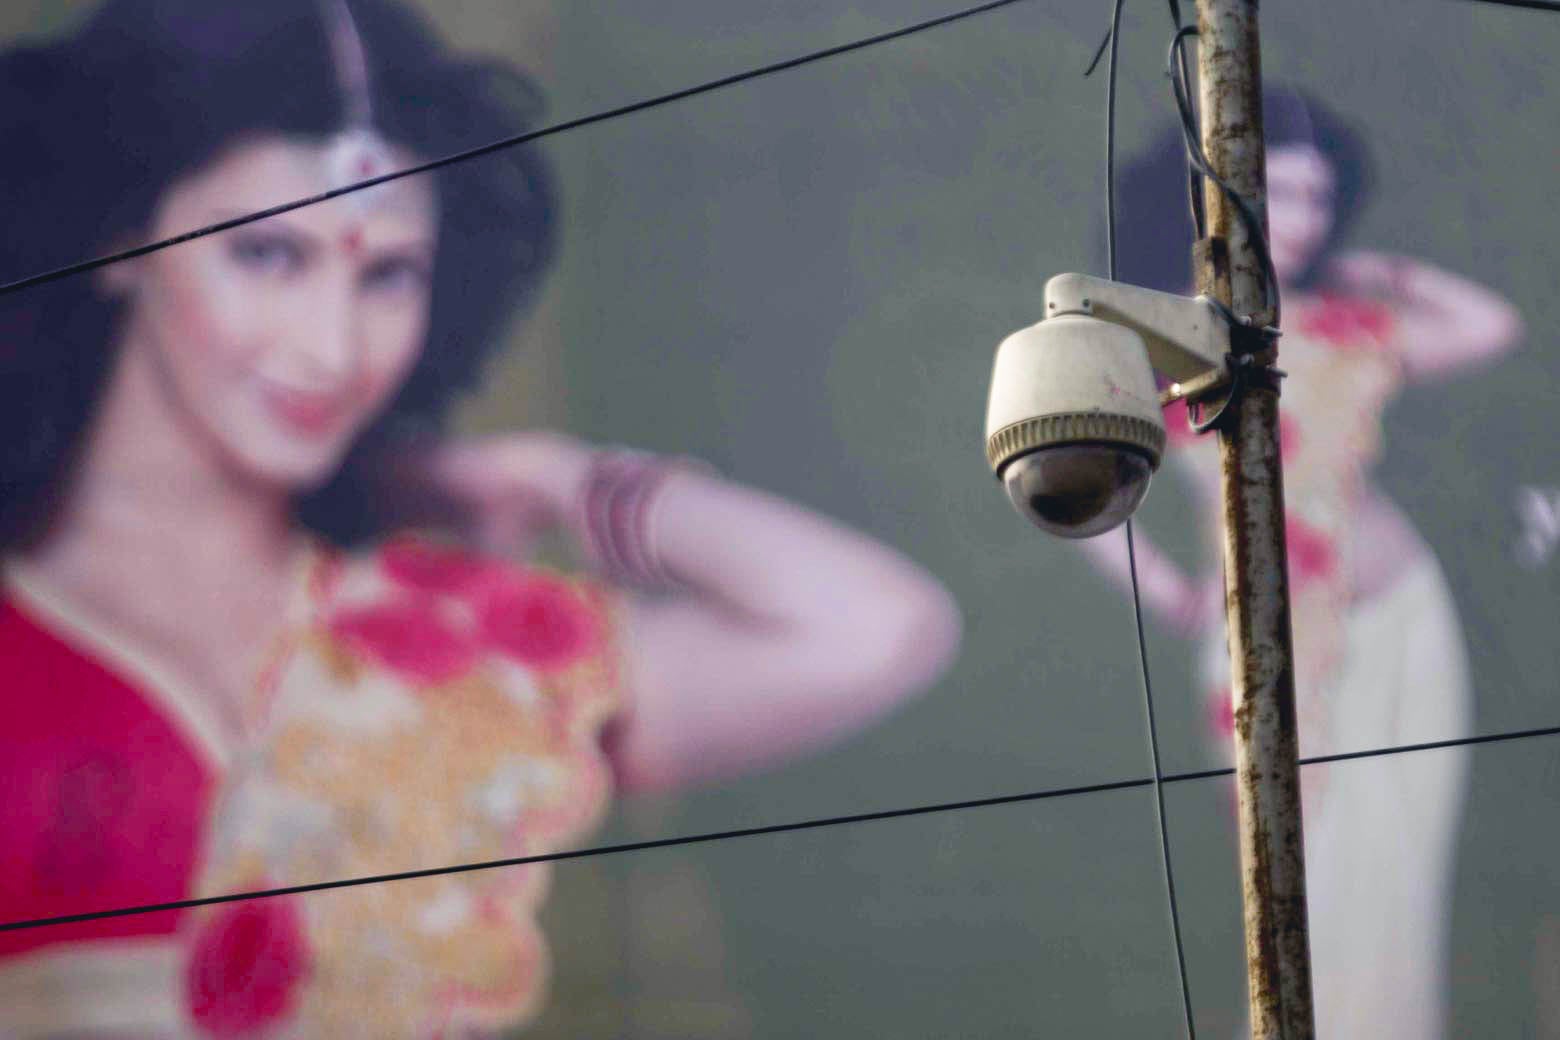 A CCTV camera on a pole in front of a mural of a woman in traditional Indian dress.